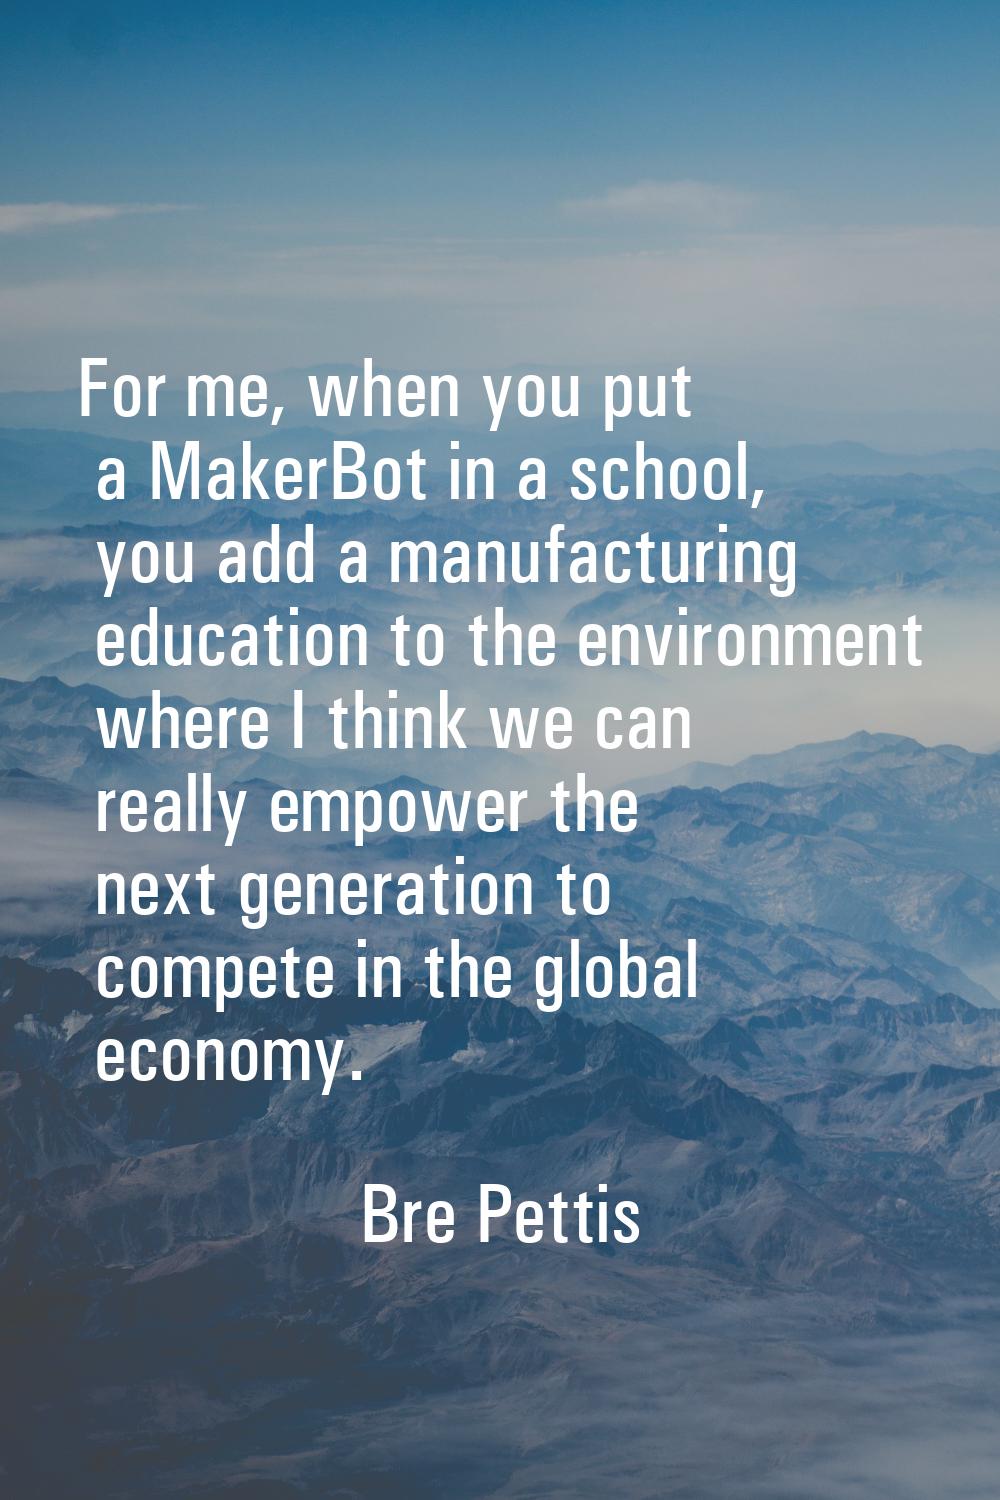 For me, when you put a MakerBot in a school, you add a manufacturing education to the environment w